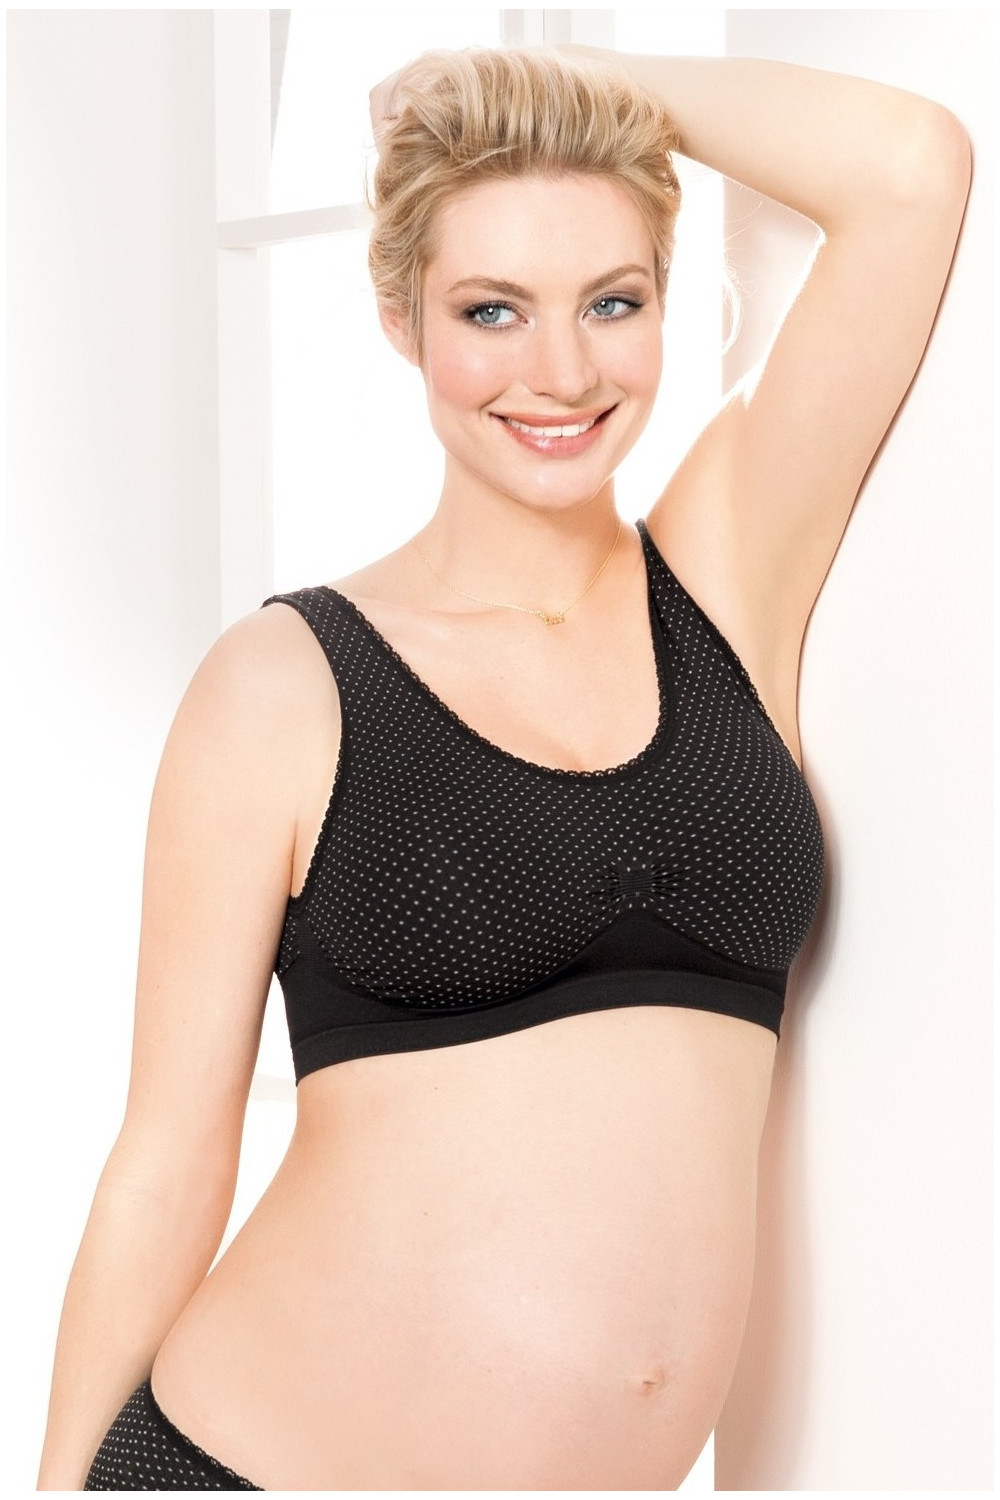 Non wired pregnancy - breastfeeding bra with reinforced cups that